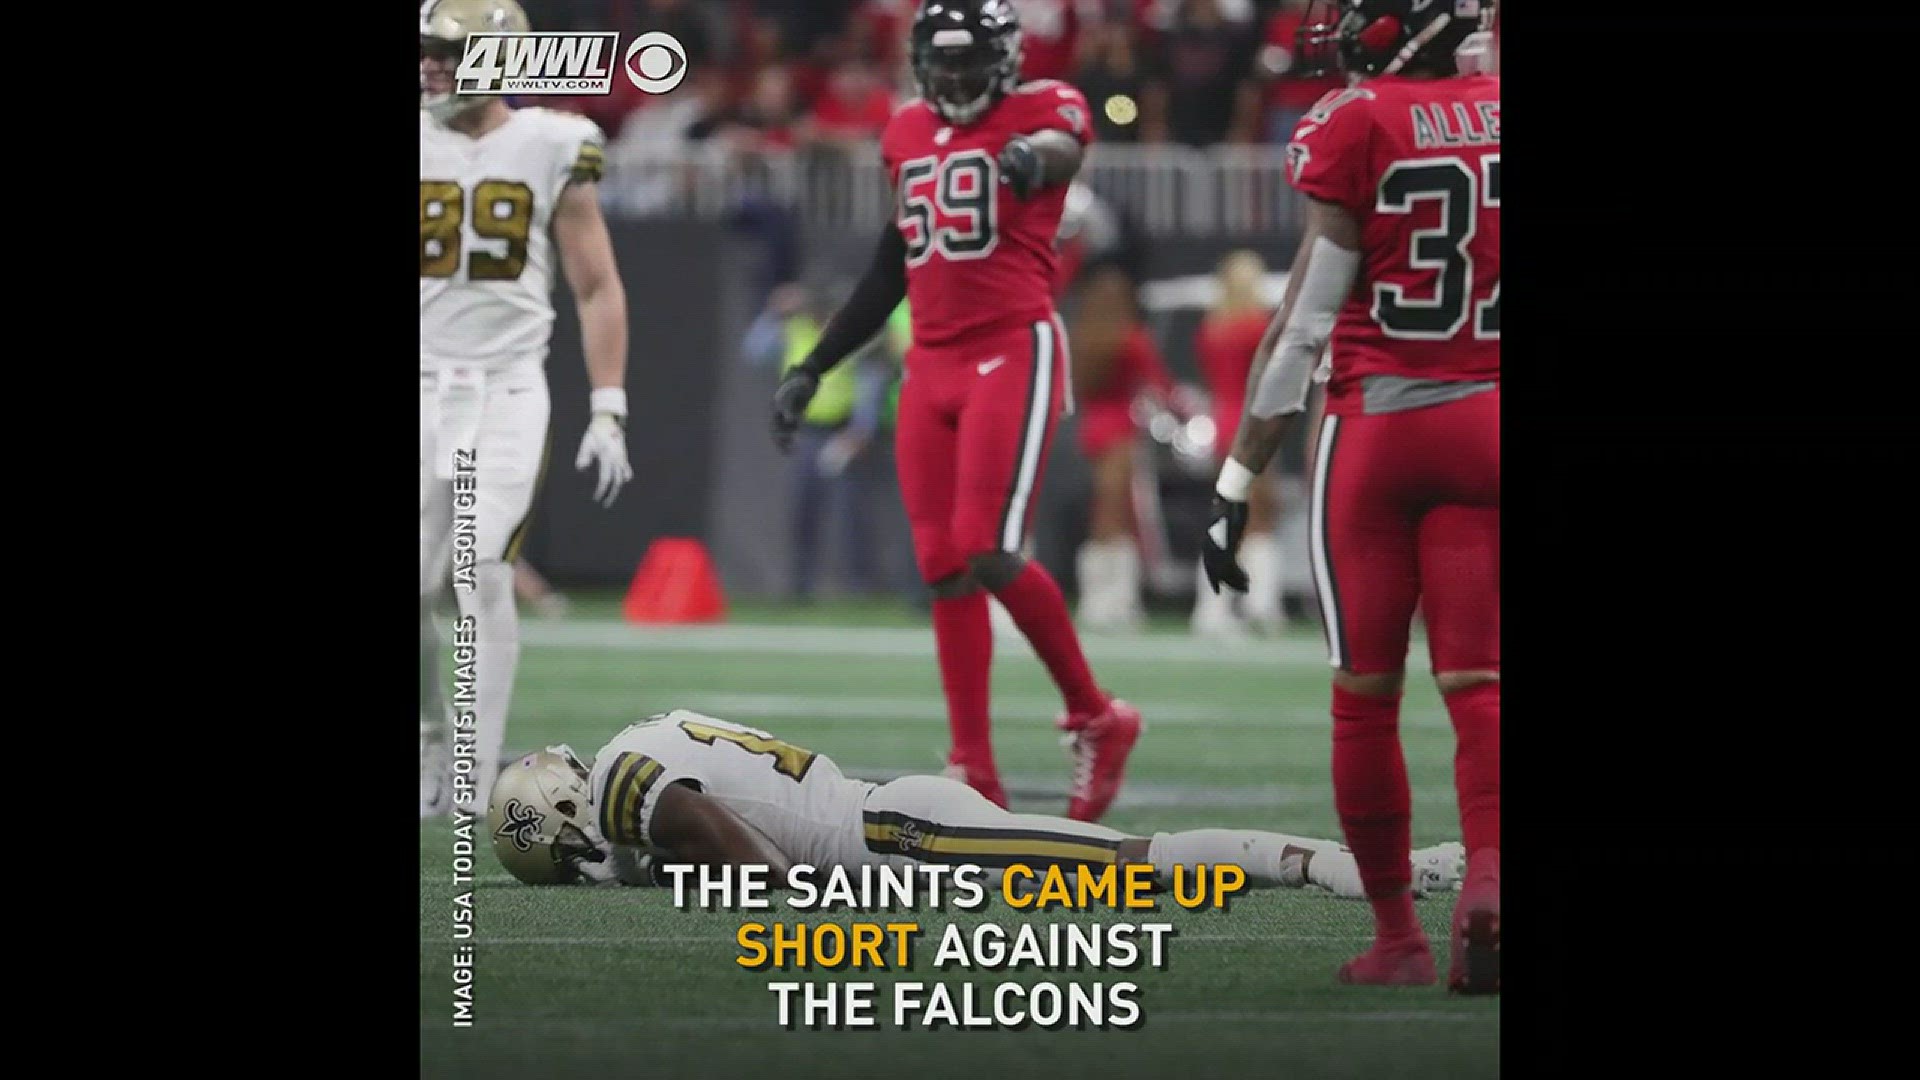 The Saints fell to the Falcons Thursday night in a game filled with Saints penalties and injuries.